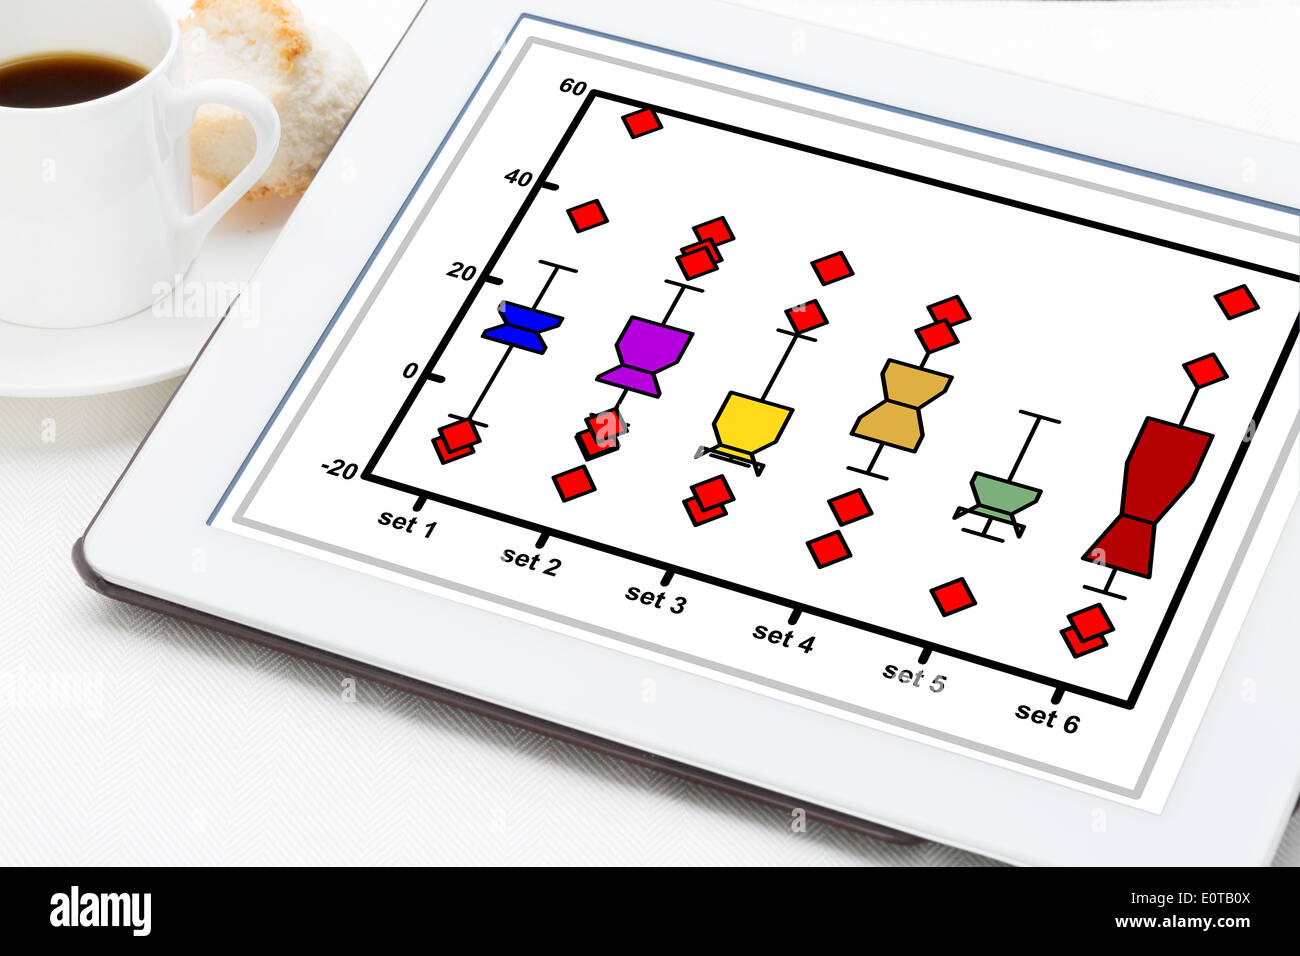 statistics or data analysis concept - a notched box plot on a digital tablet with a cup of coffee Stock Photo